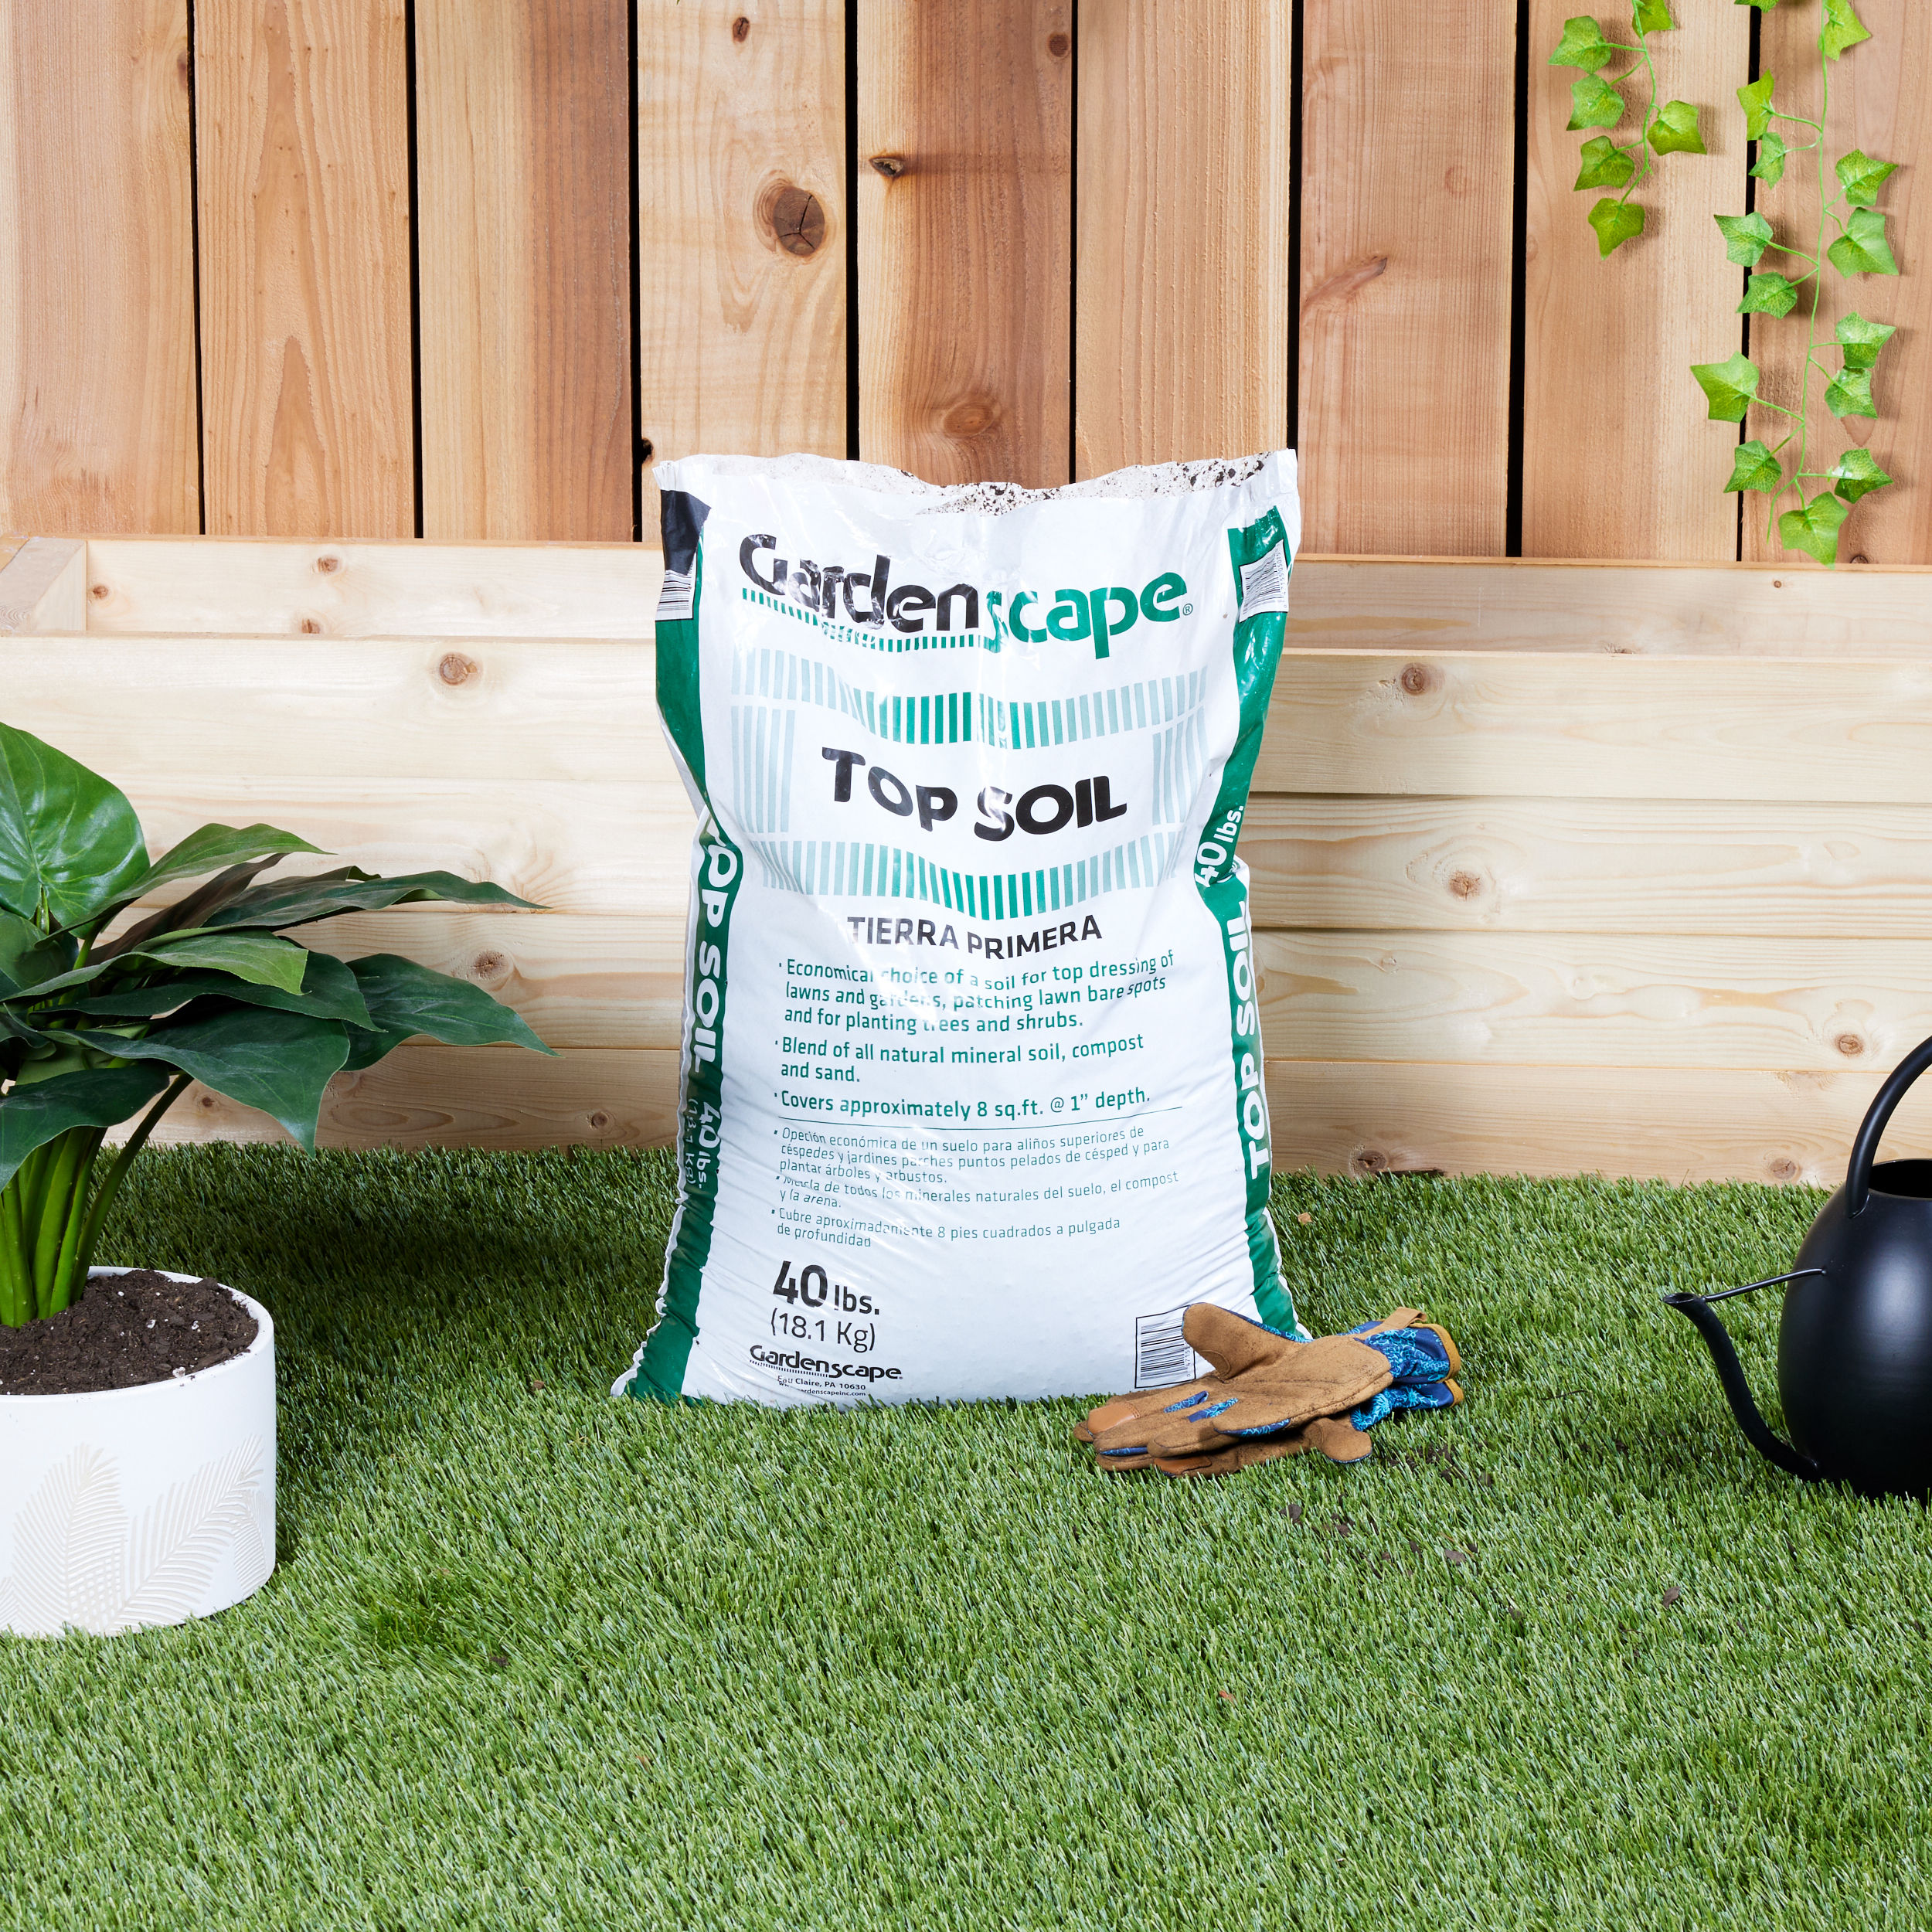 Best Sand for a Vegetable Garden - Mazzega's Landscaping Supplies